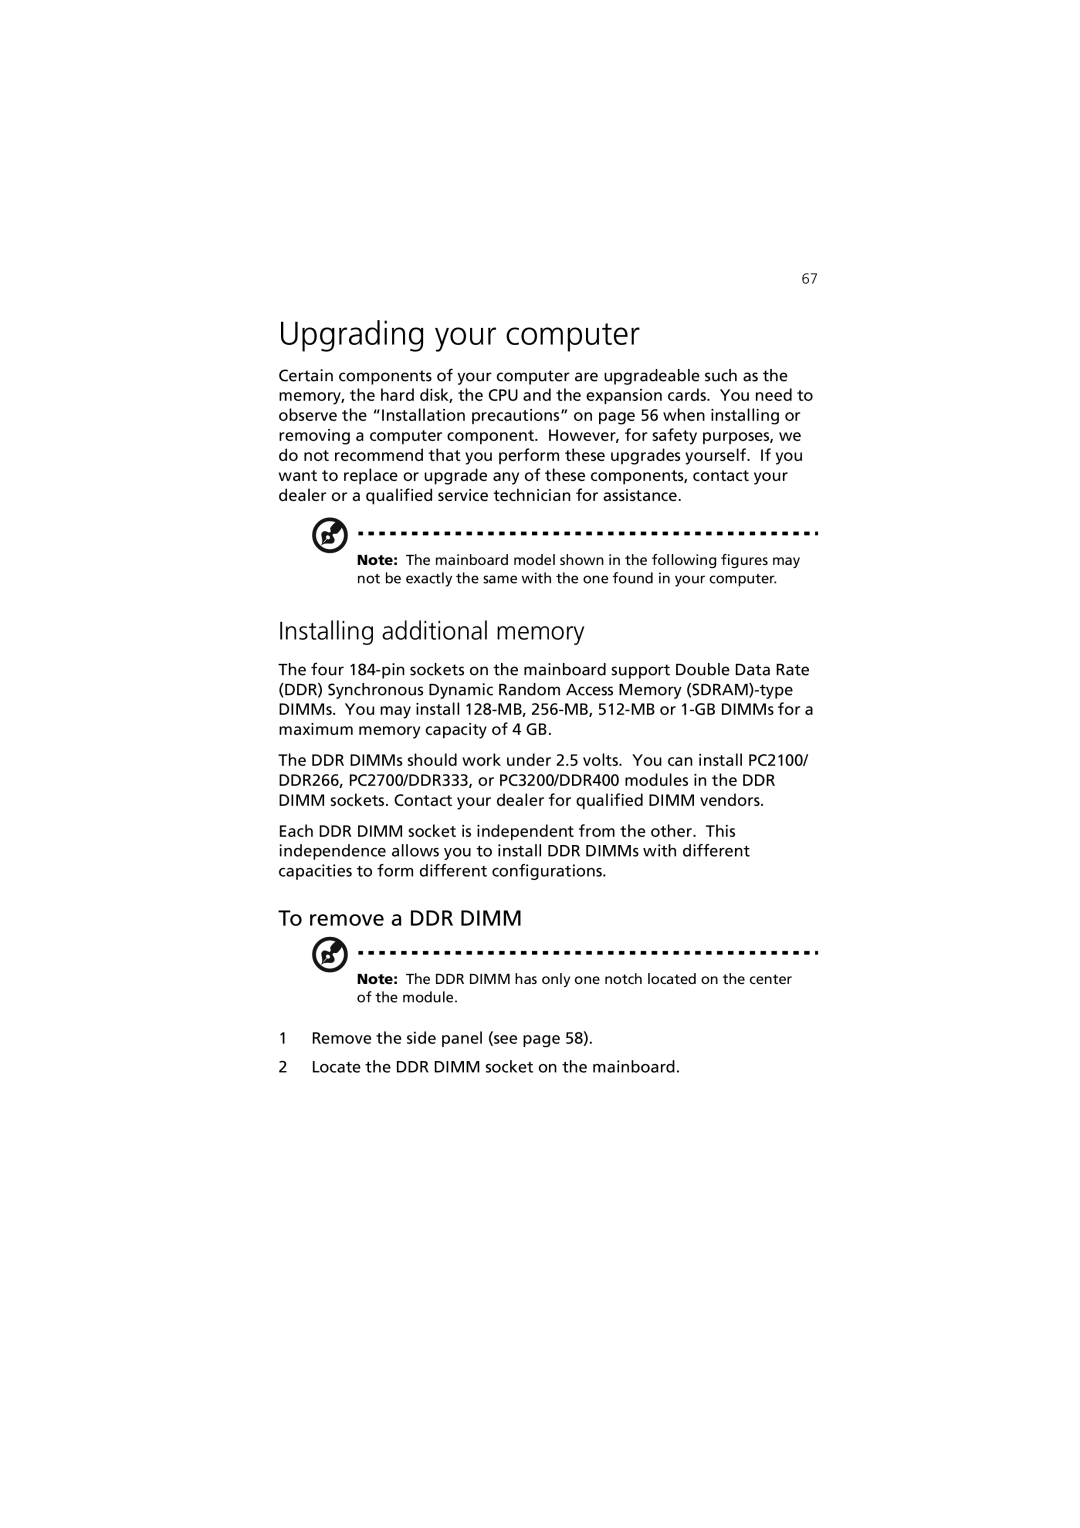 Acer 7600 manual Upgrading your computer, Installing additional memory, To remove a DDR DIMM 